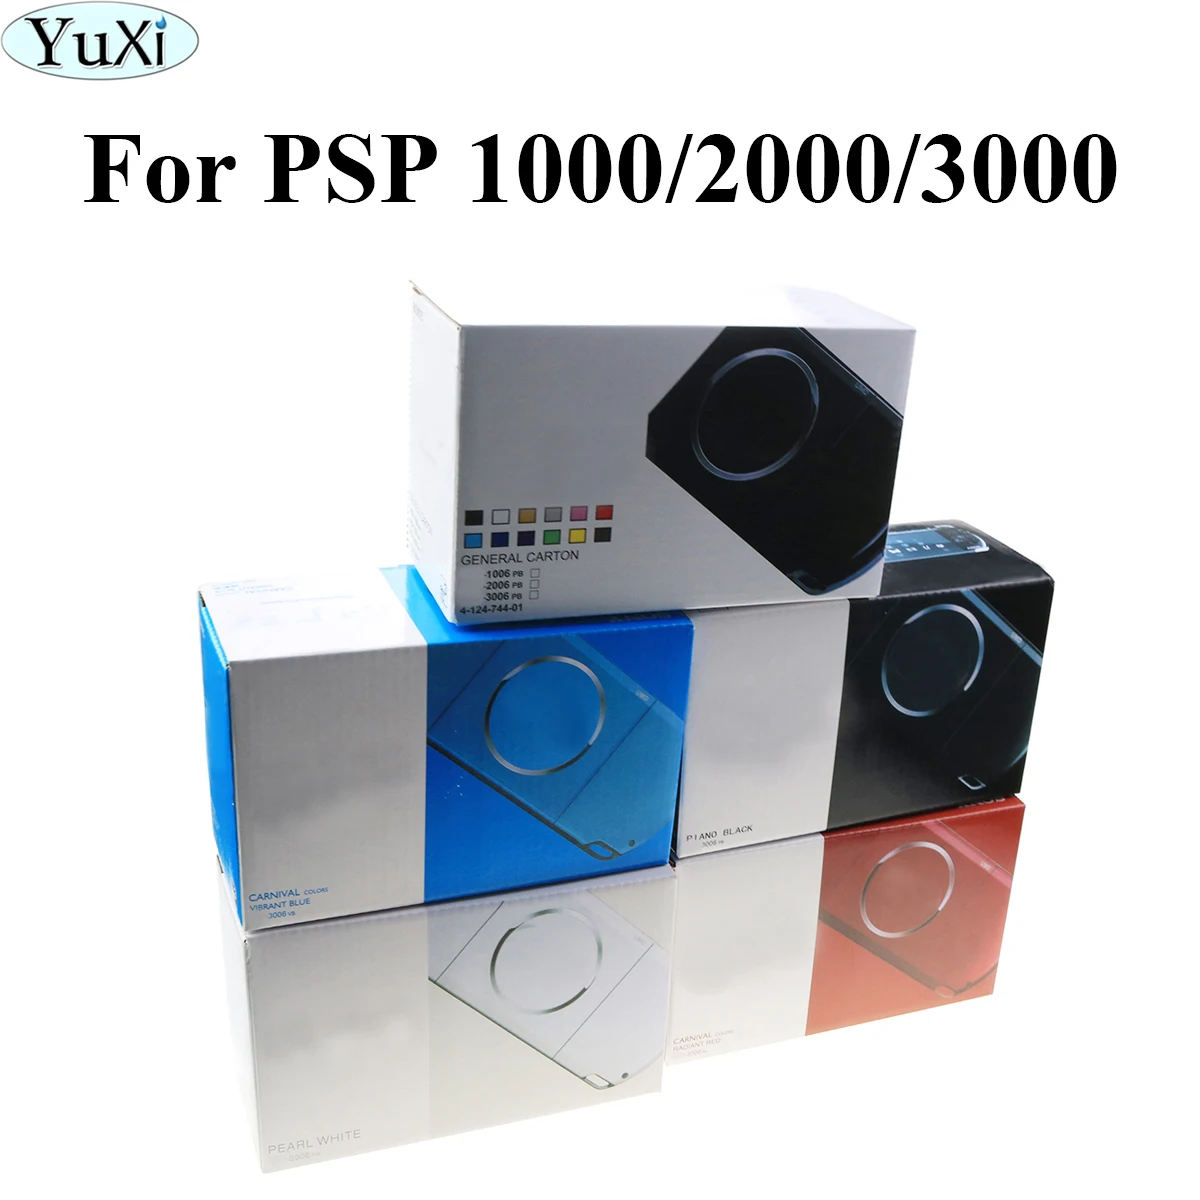 

YuXi 10Set New Packing Box Packing Carton with Manual and Insert for PSP 3000 2000 1000 Game Console for PSP3000 PSP2000 PSP1000